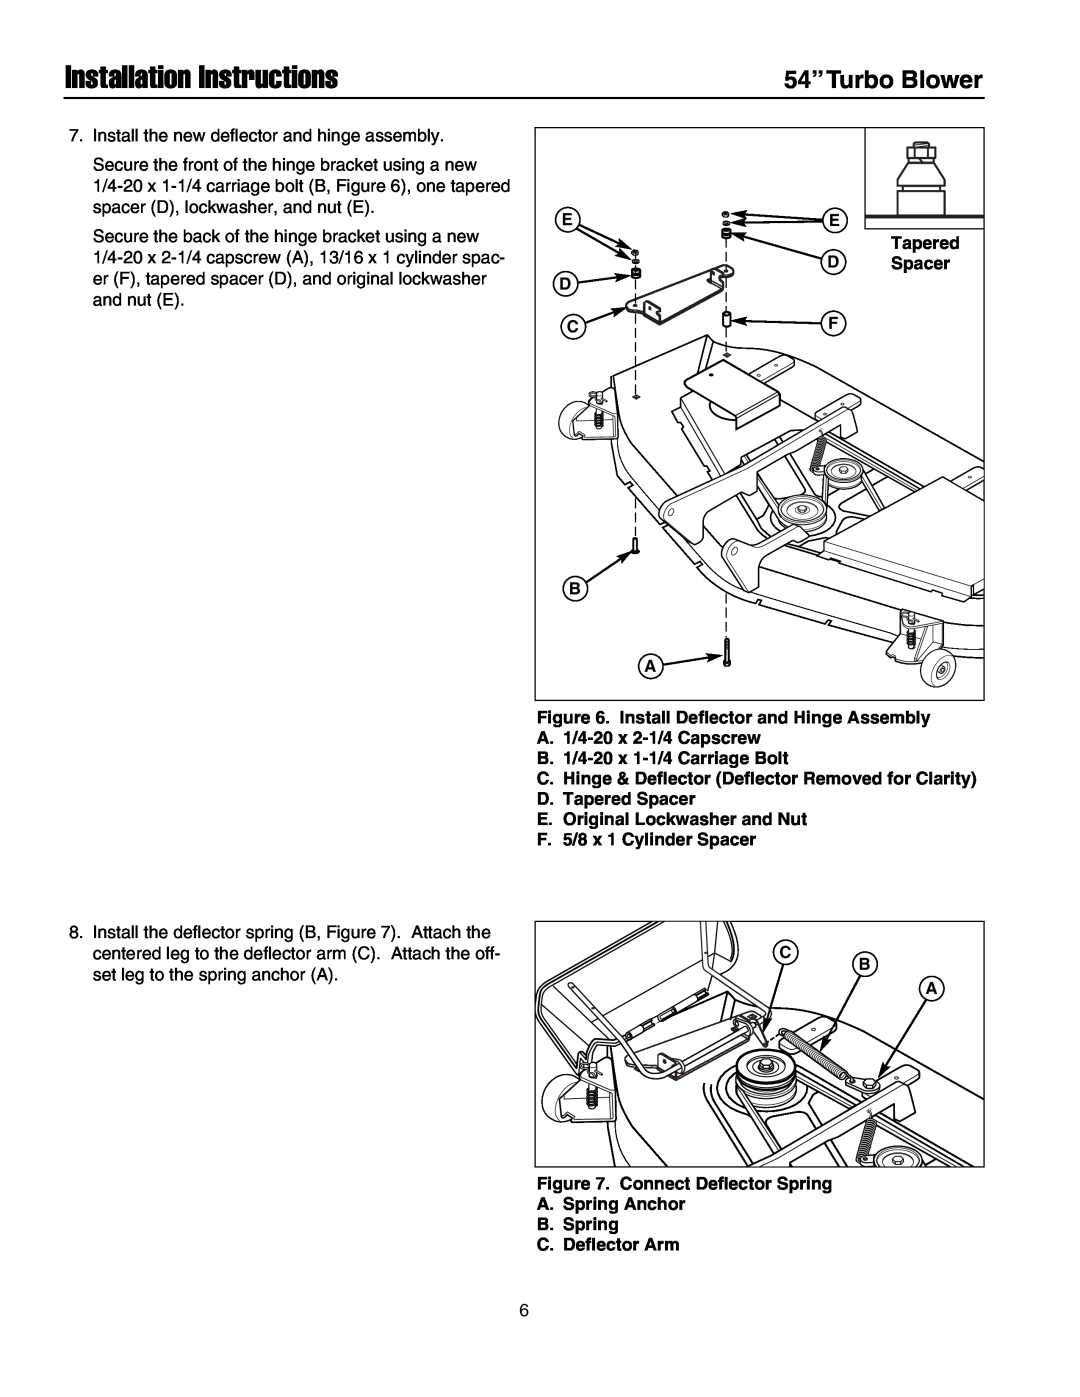 Snapper 1693706, 1695299 Installation Instructions, 54”Turbo Blower, Install the new deflector and hinge assembly 